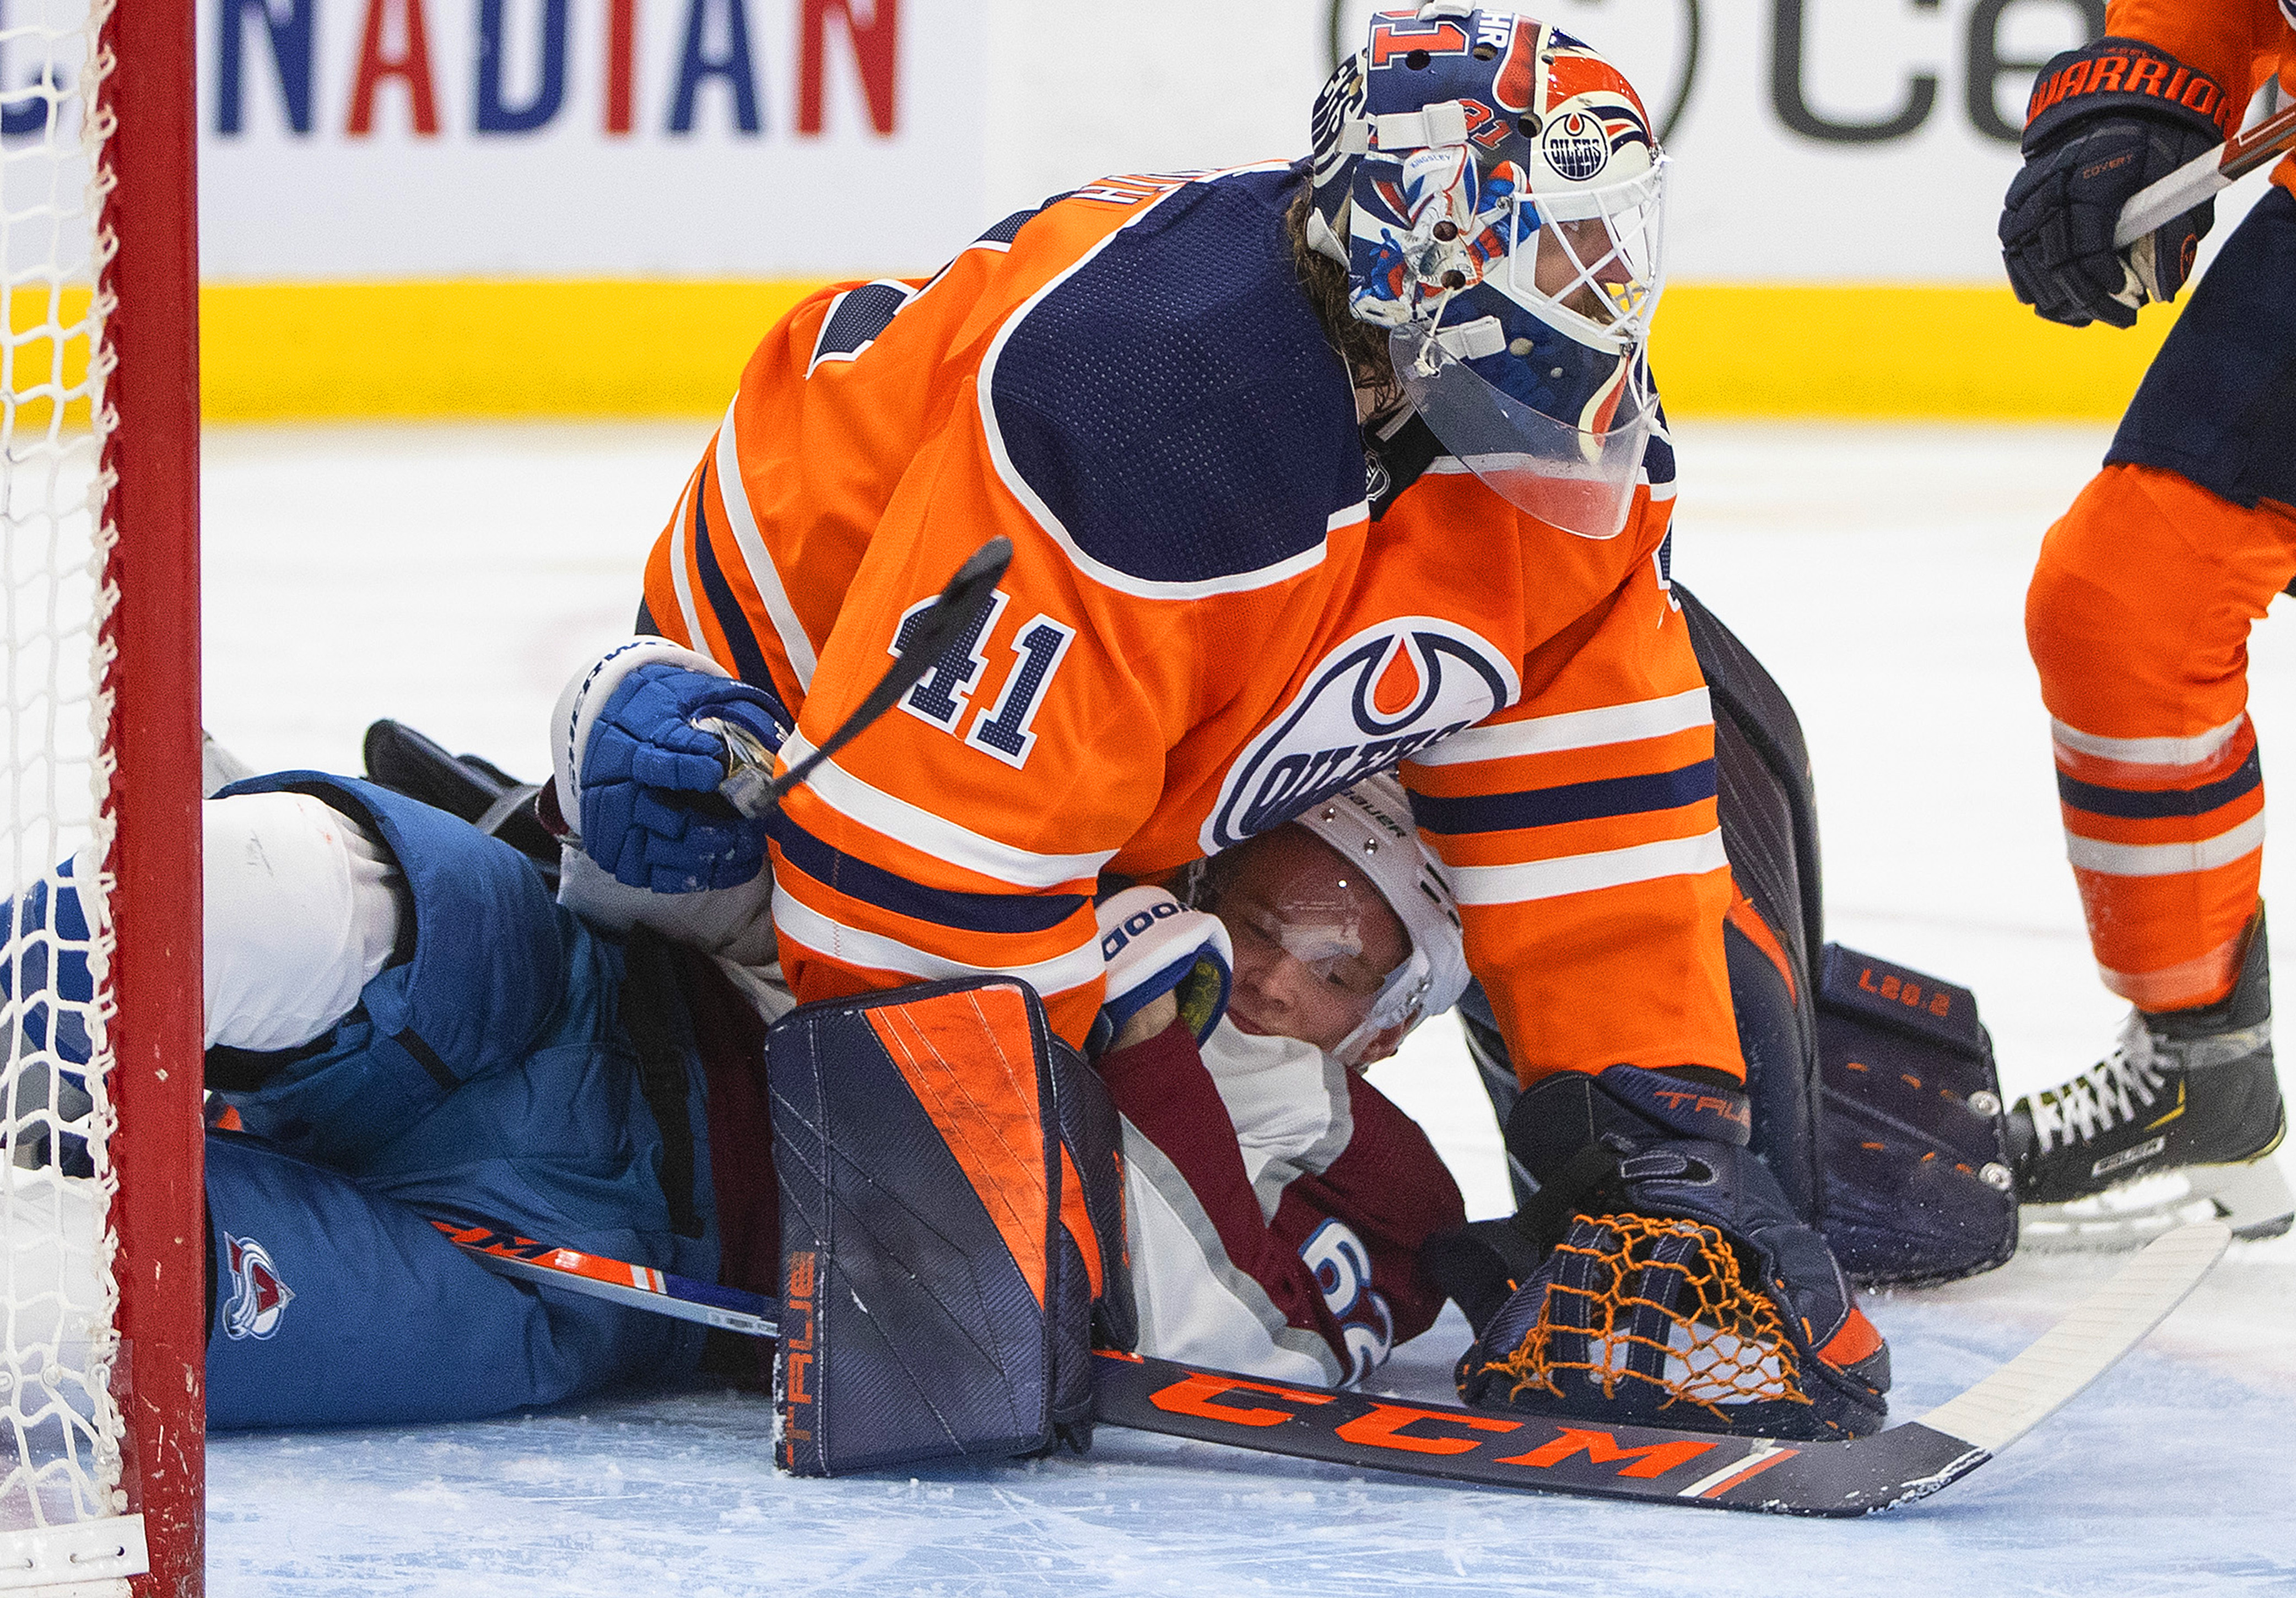 Kane scores 3 as Oilers beat Avs 6-3, clinch playoff spot